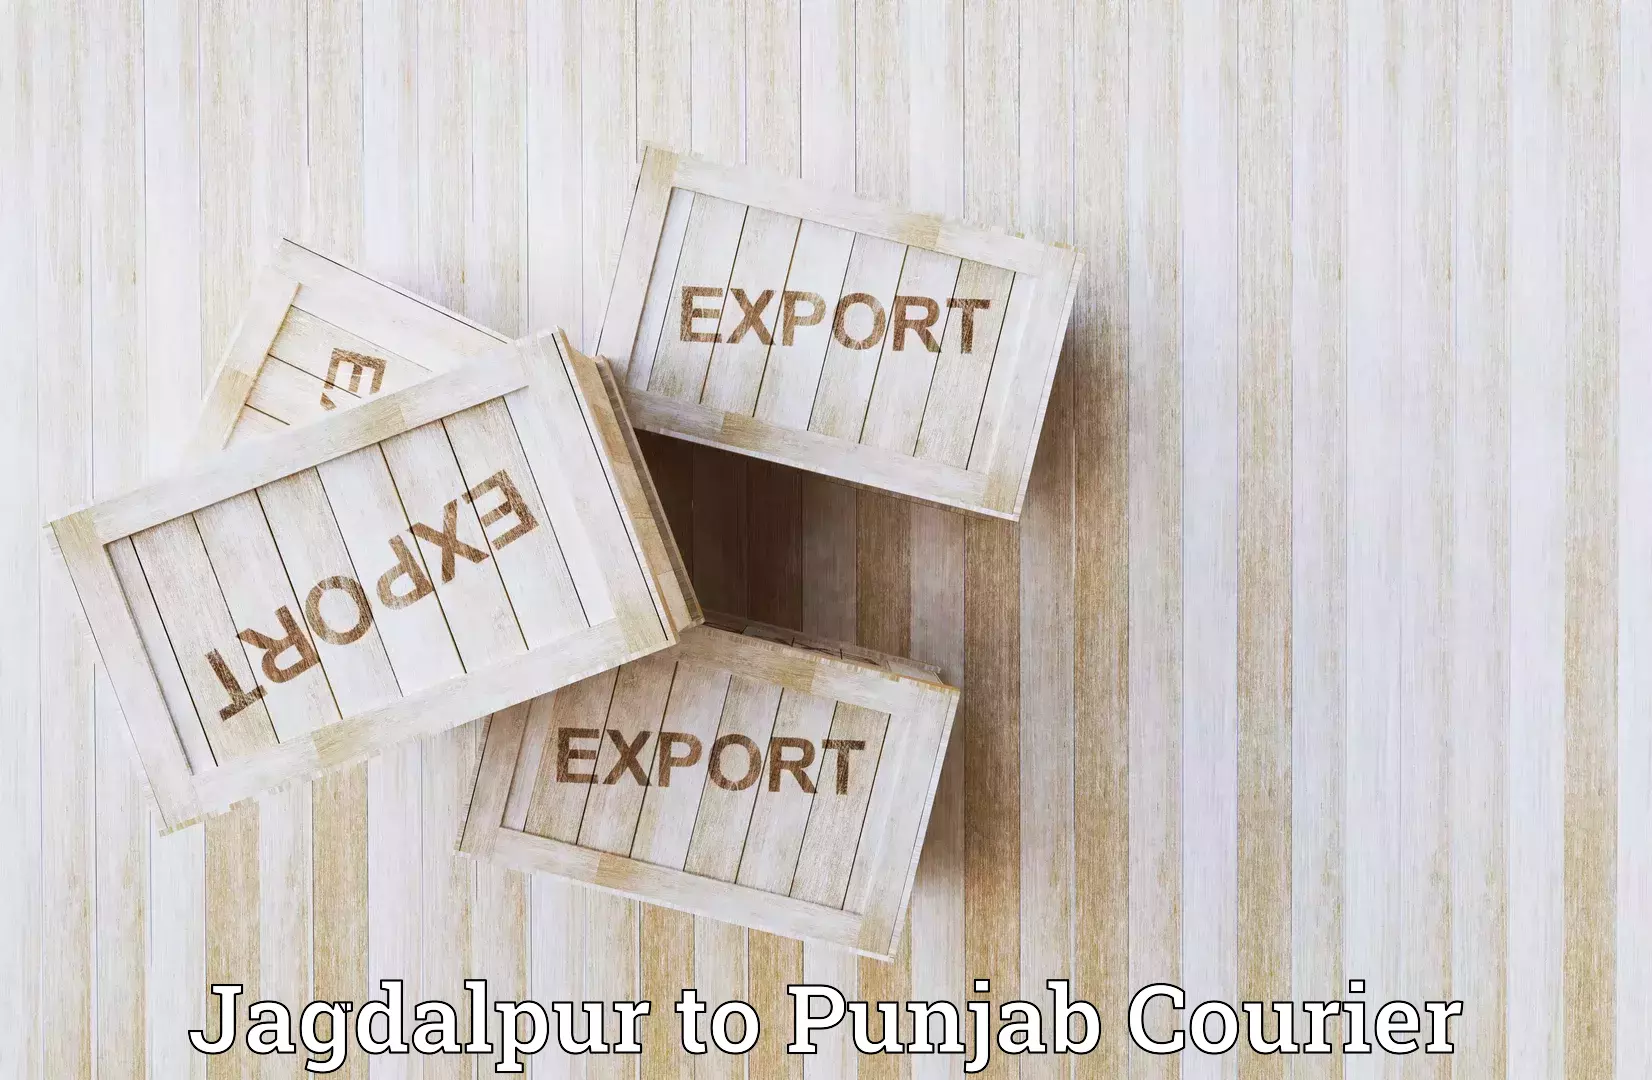 Seamless shipping experience in Jagdalpur to Punjab